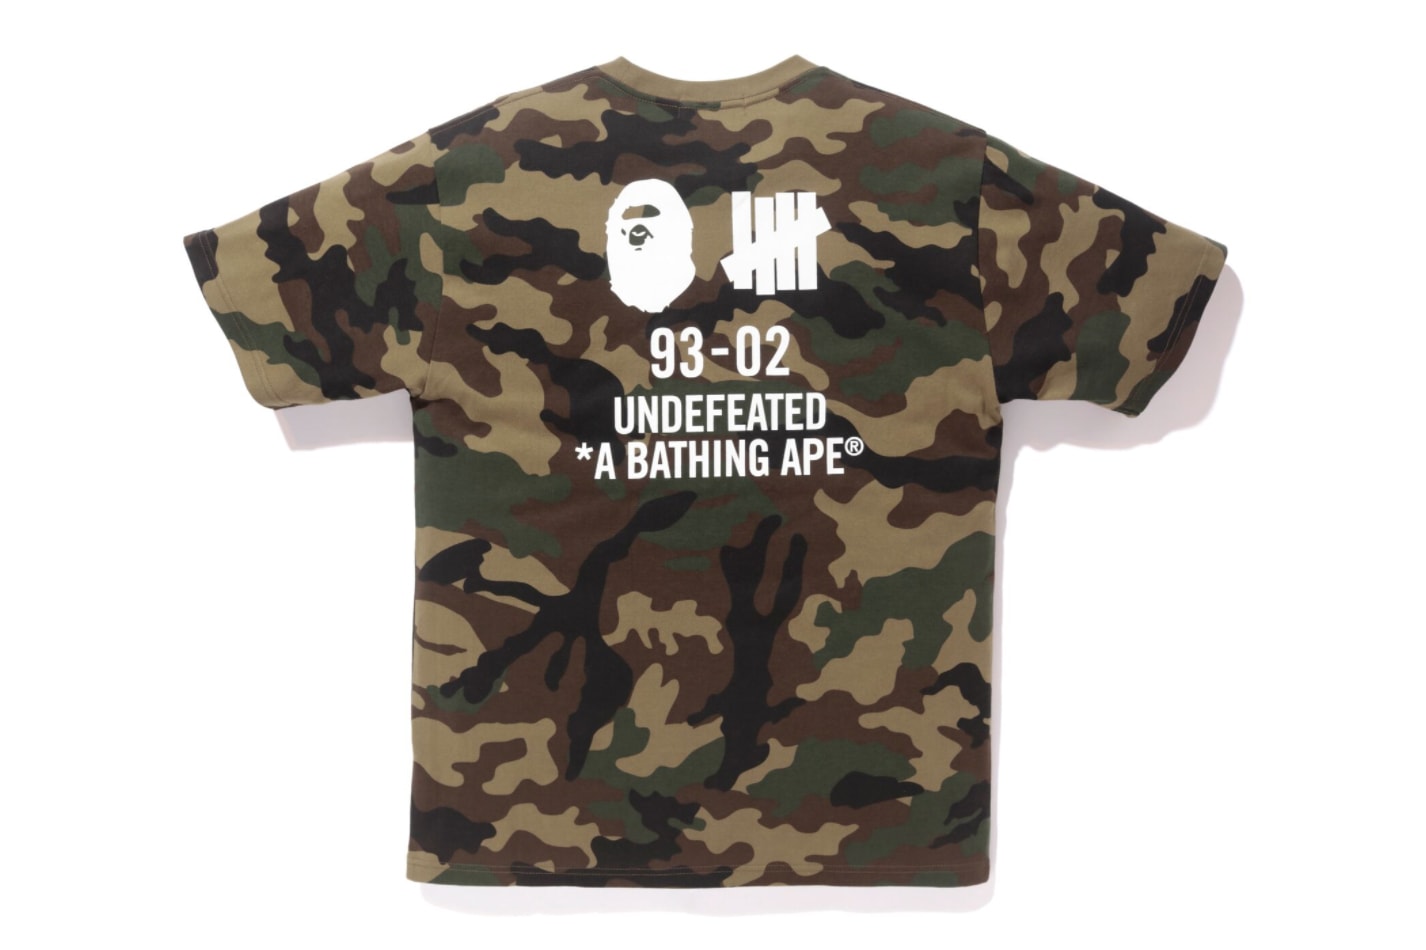 UNDEFEATED BAPE A Bathing Ape Fall/Winter 2017 Collection